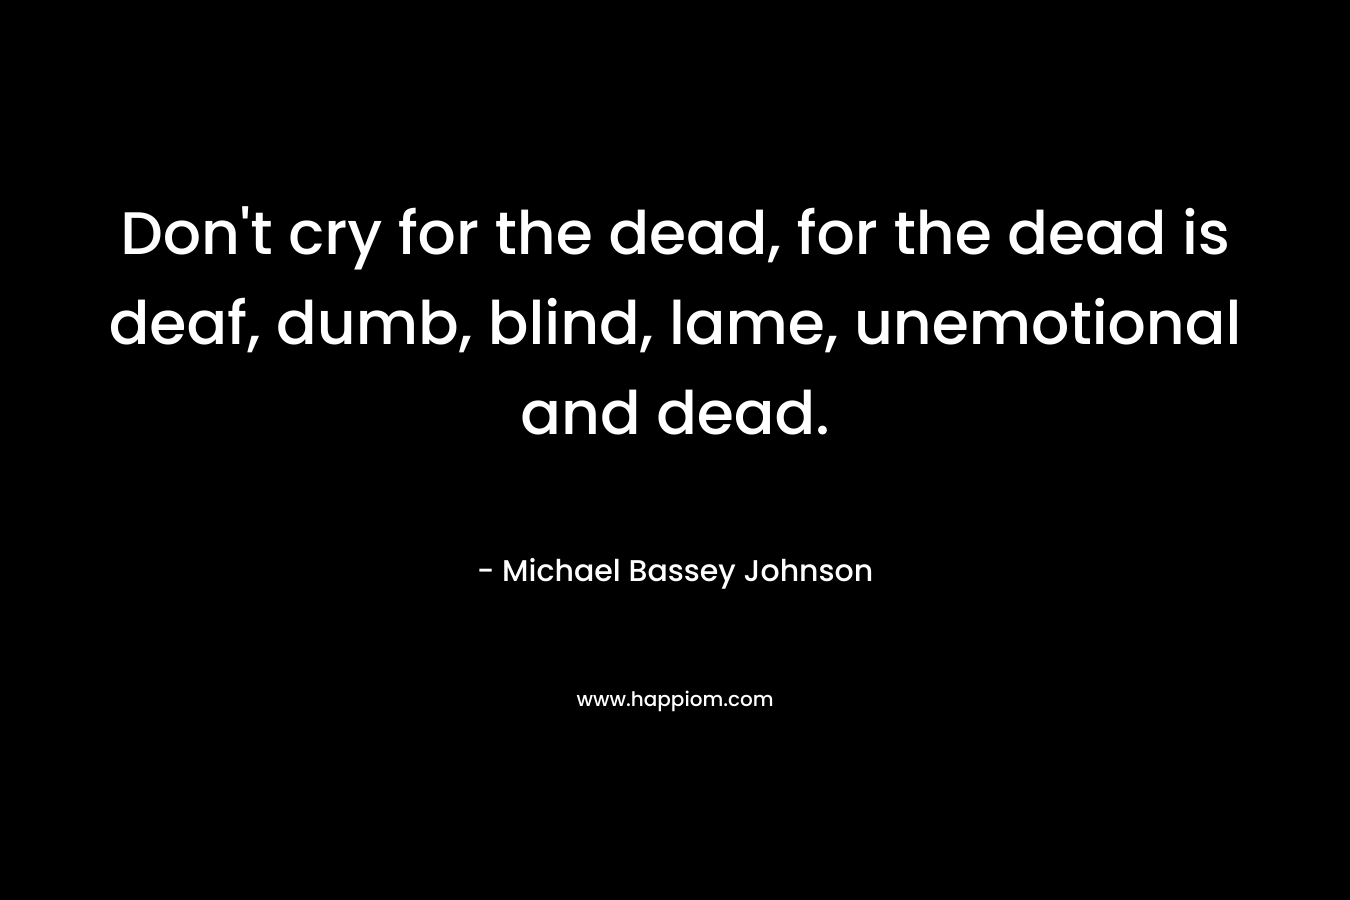 Don’t cry for the dead, for the dead is deaf, dumb, blind, lame, unemotional and dead. – Michael Bassey Johnson